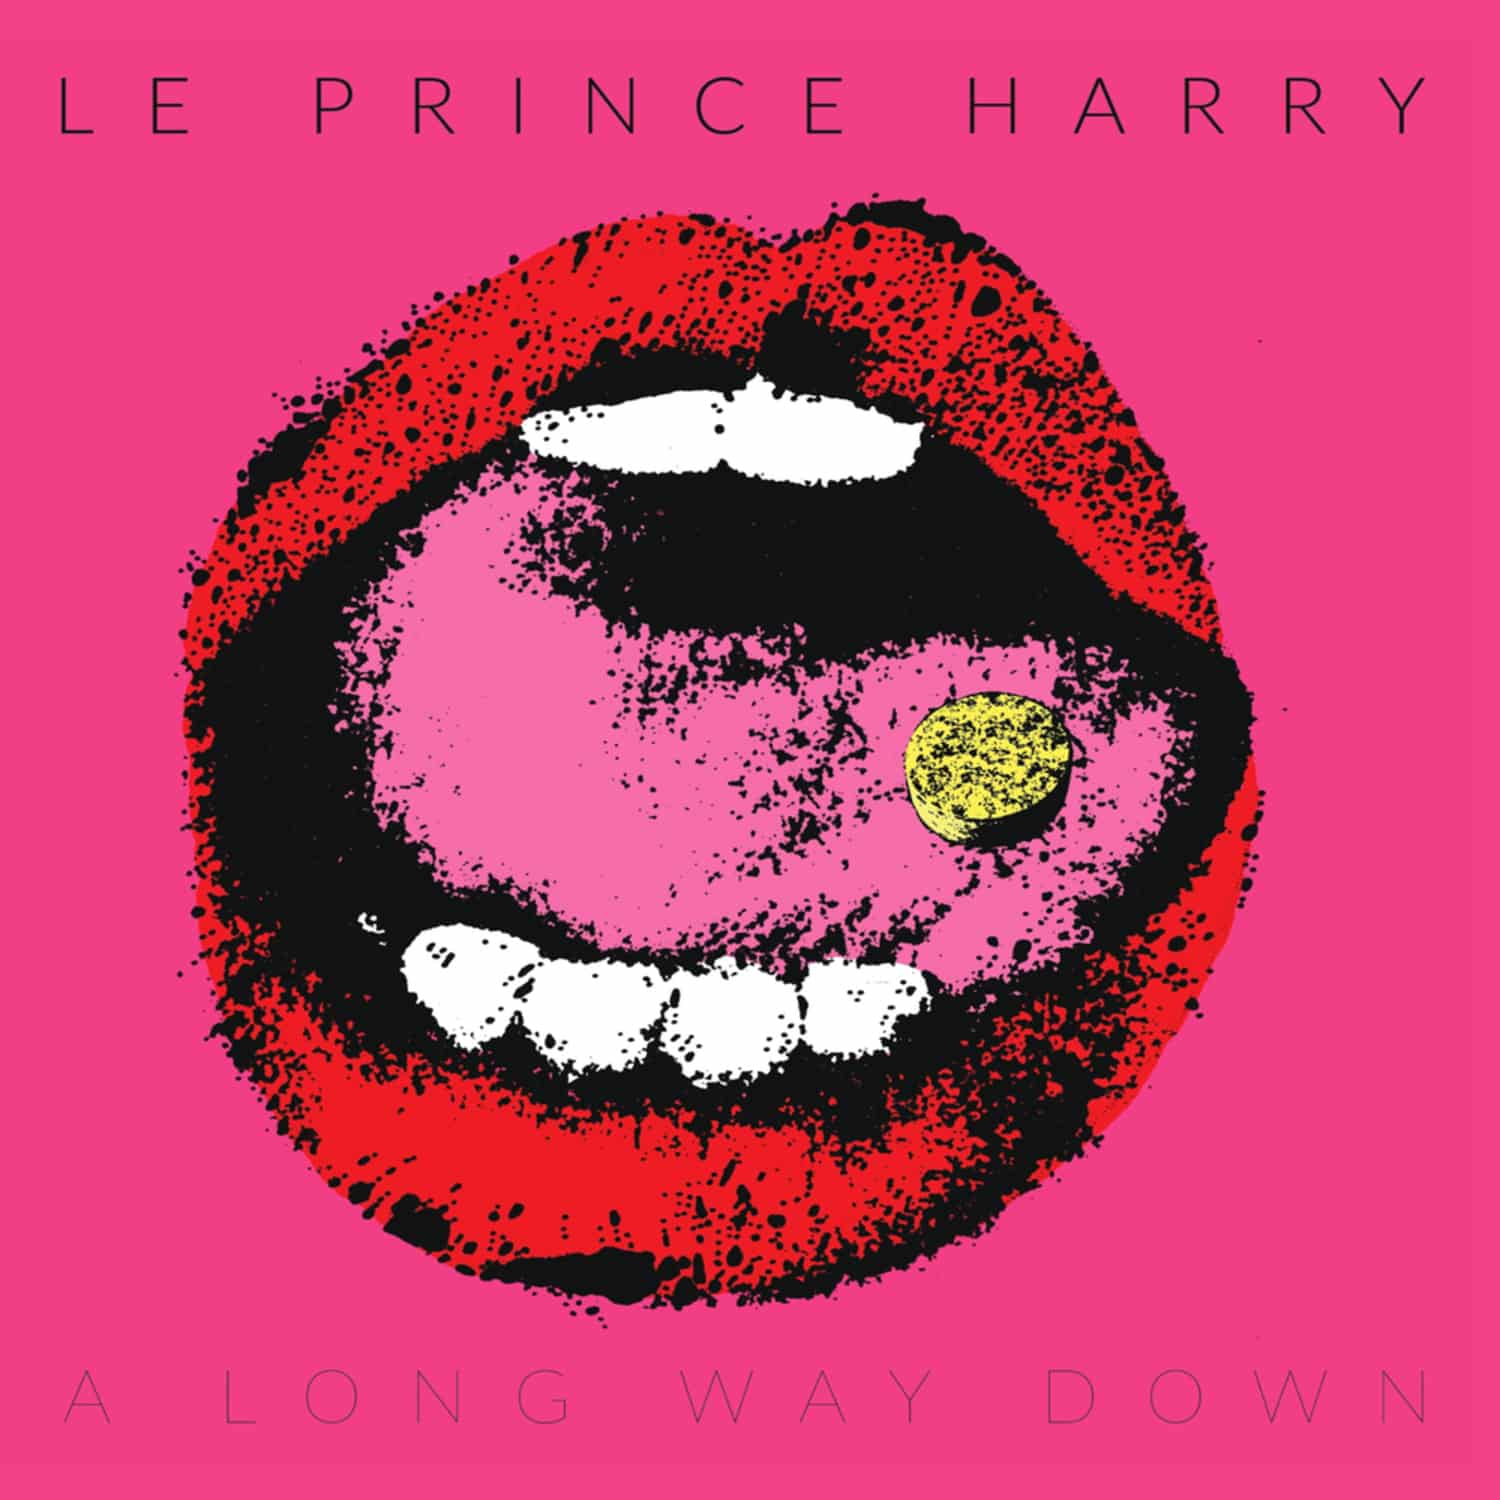 Le Prince Harry - A LONG WAY DOWN 